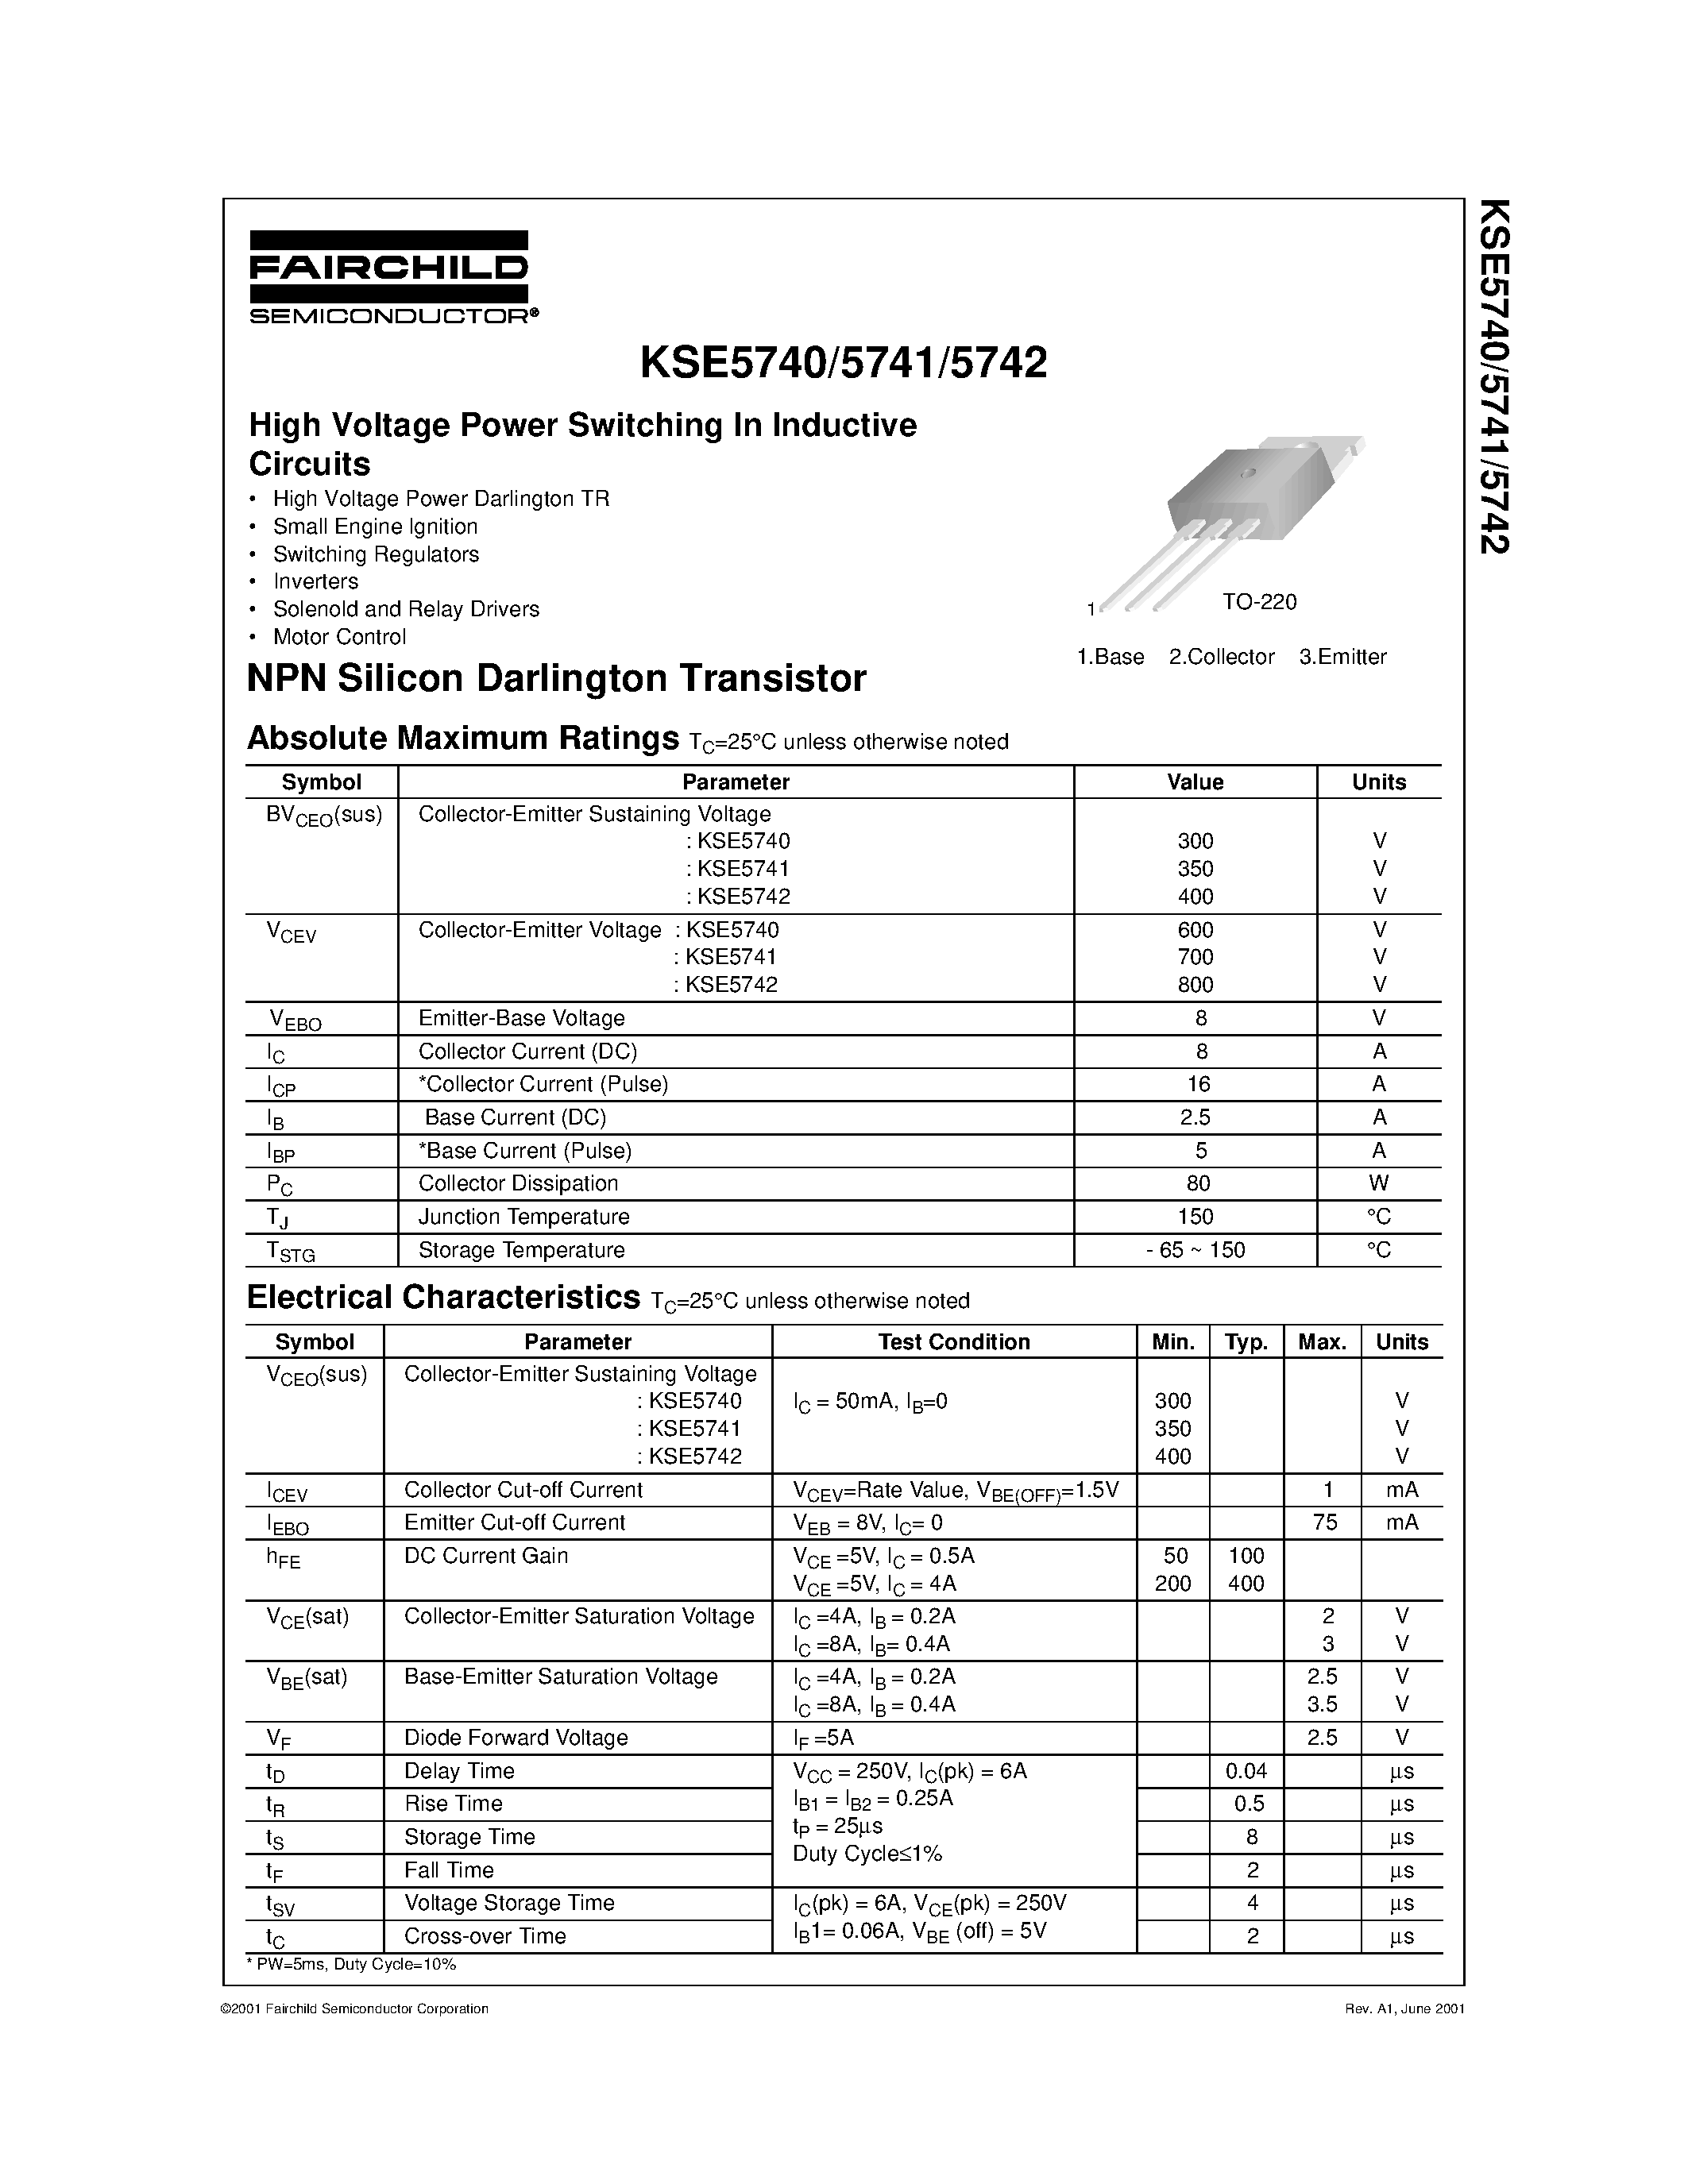 Datasheet KSE5740 - High Voltage Power Switching In Inductive Circuits page 1